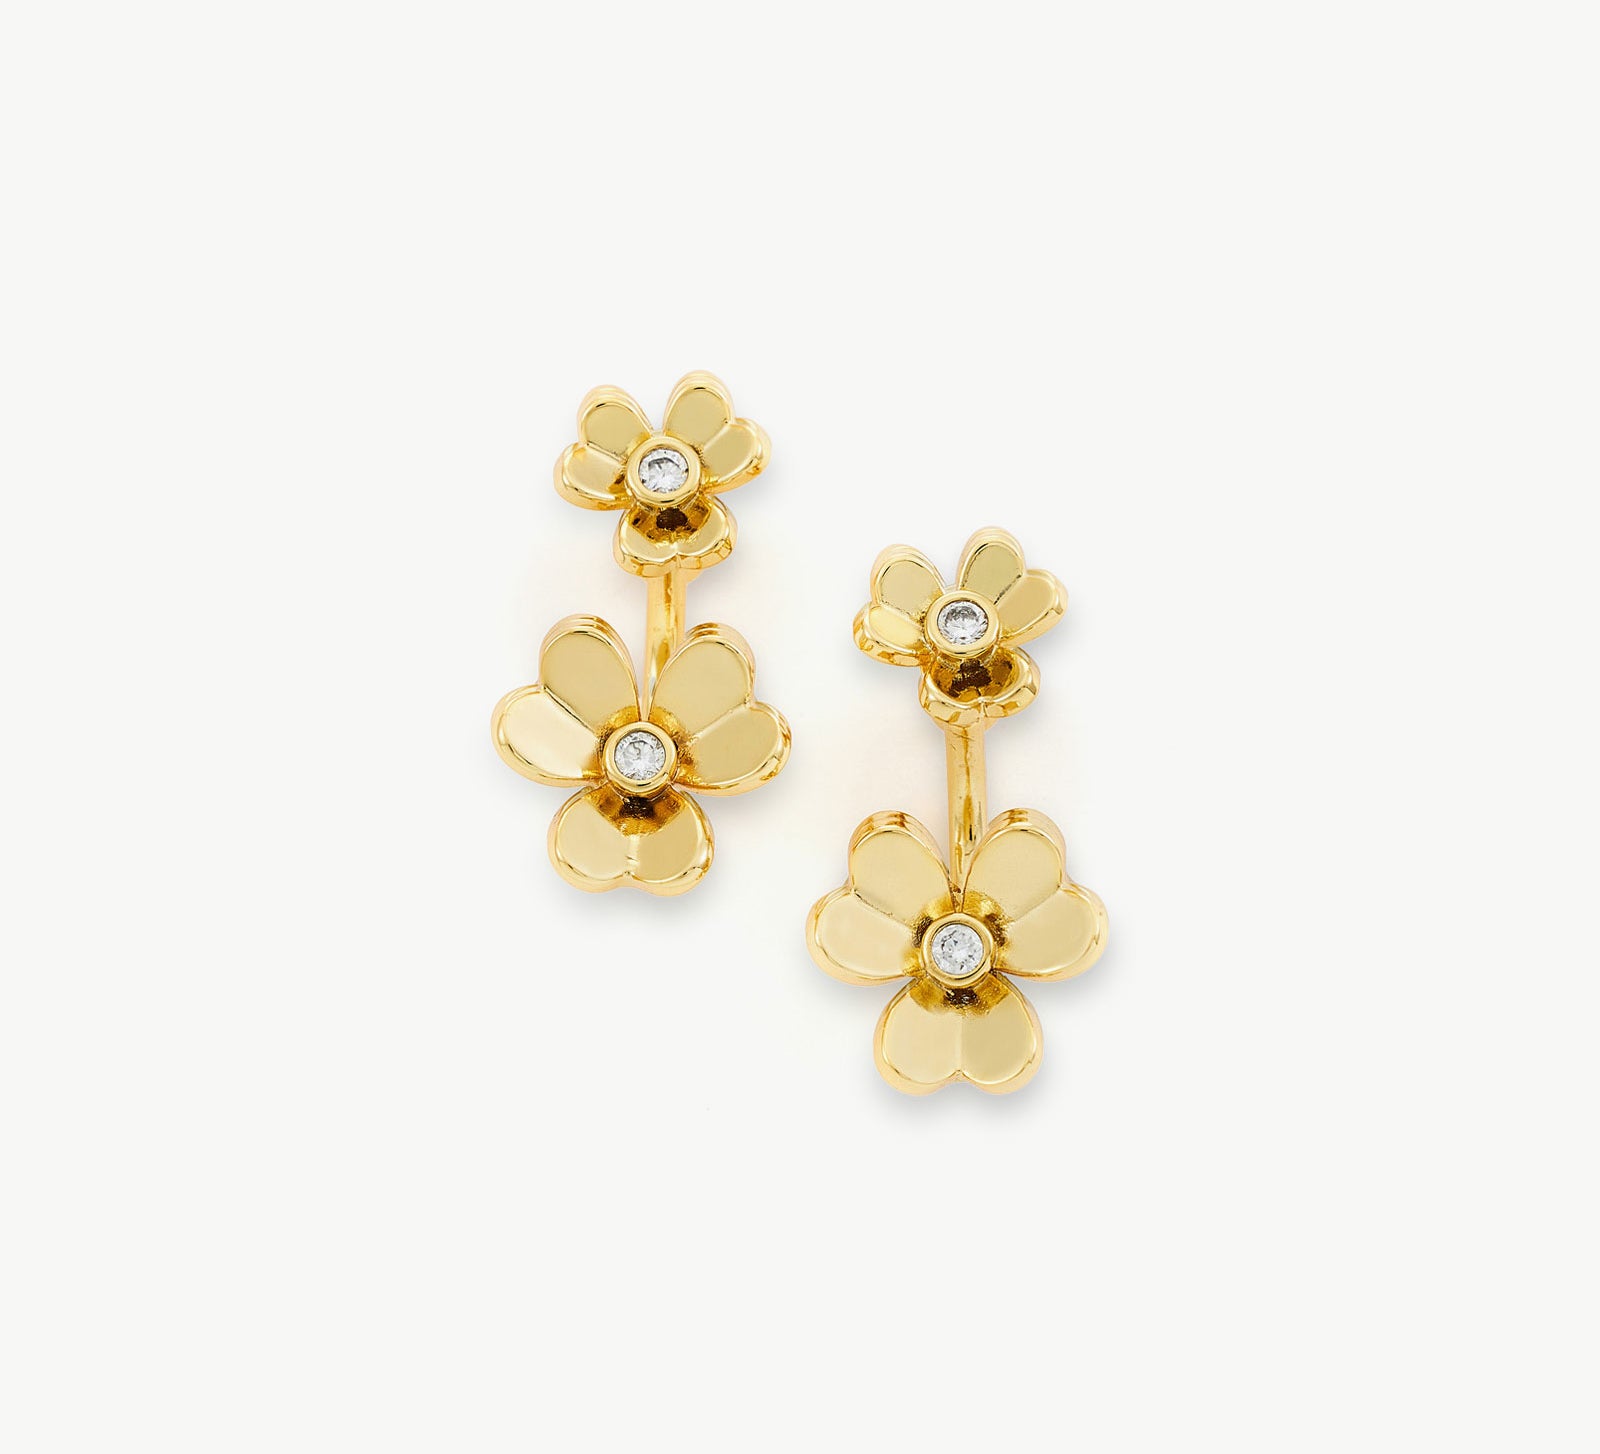 Hoop Earrings featuring double flower charms, a feminine and graceful addition to your jewelry collection for a touch of romance